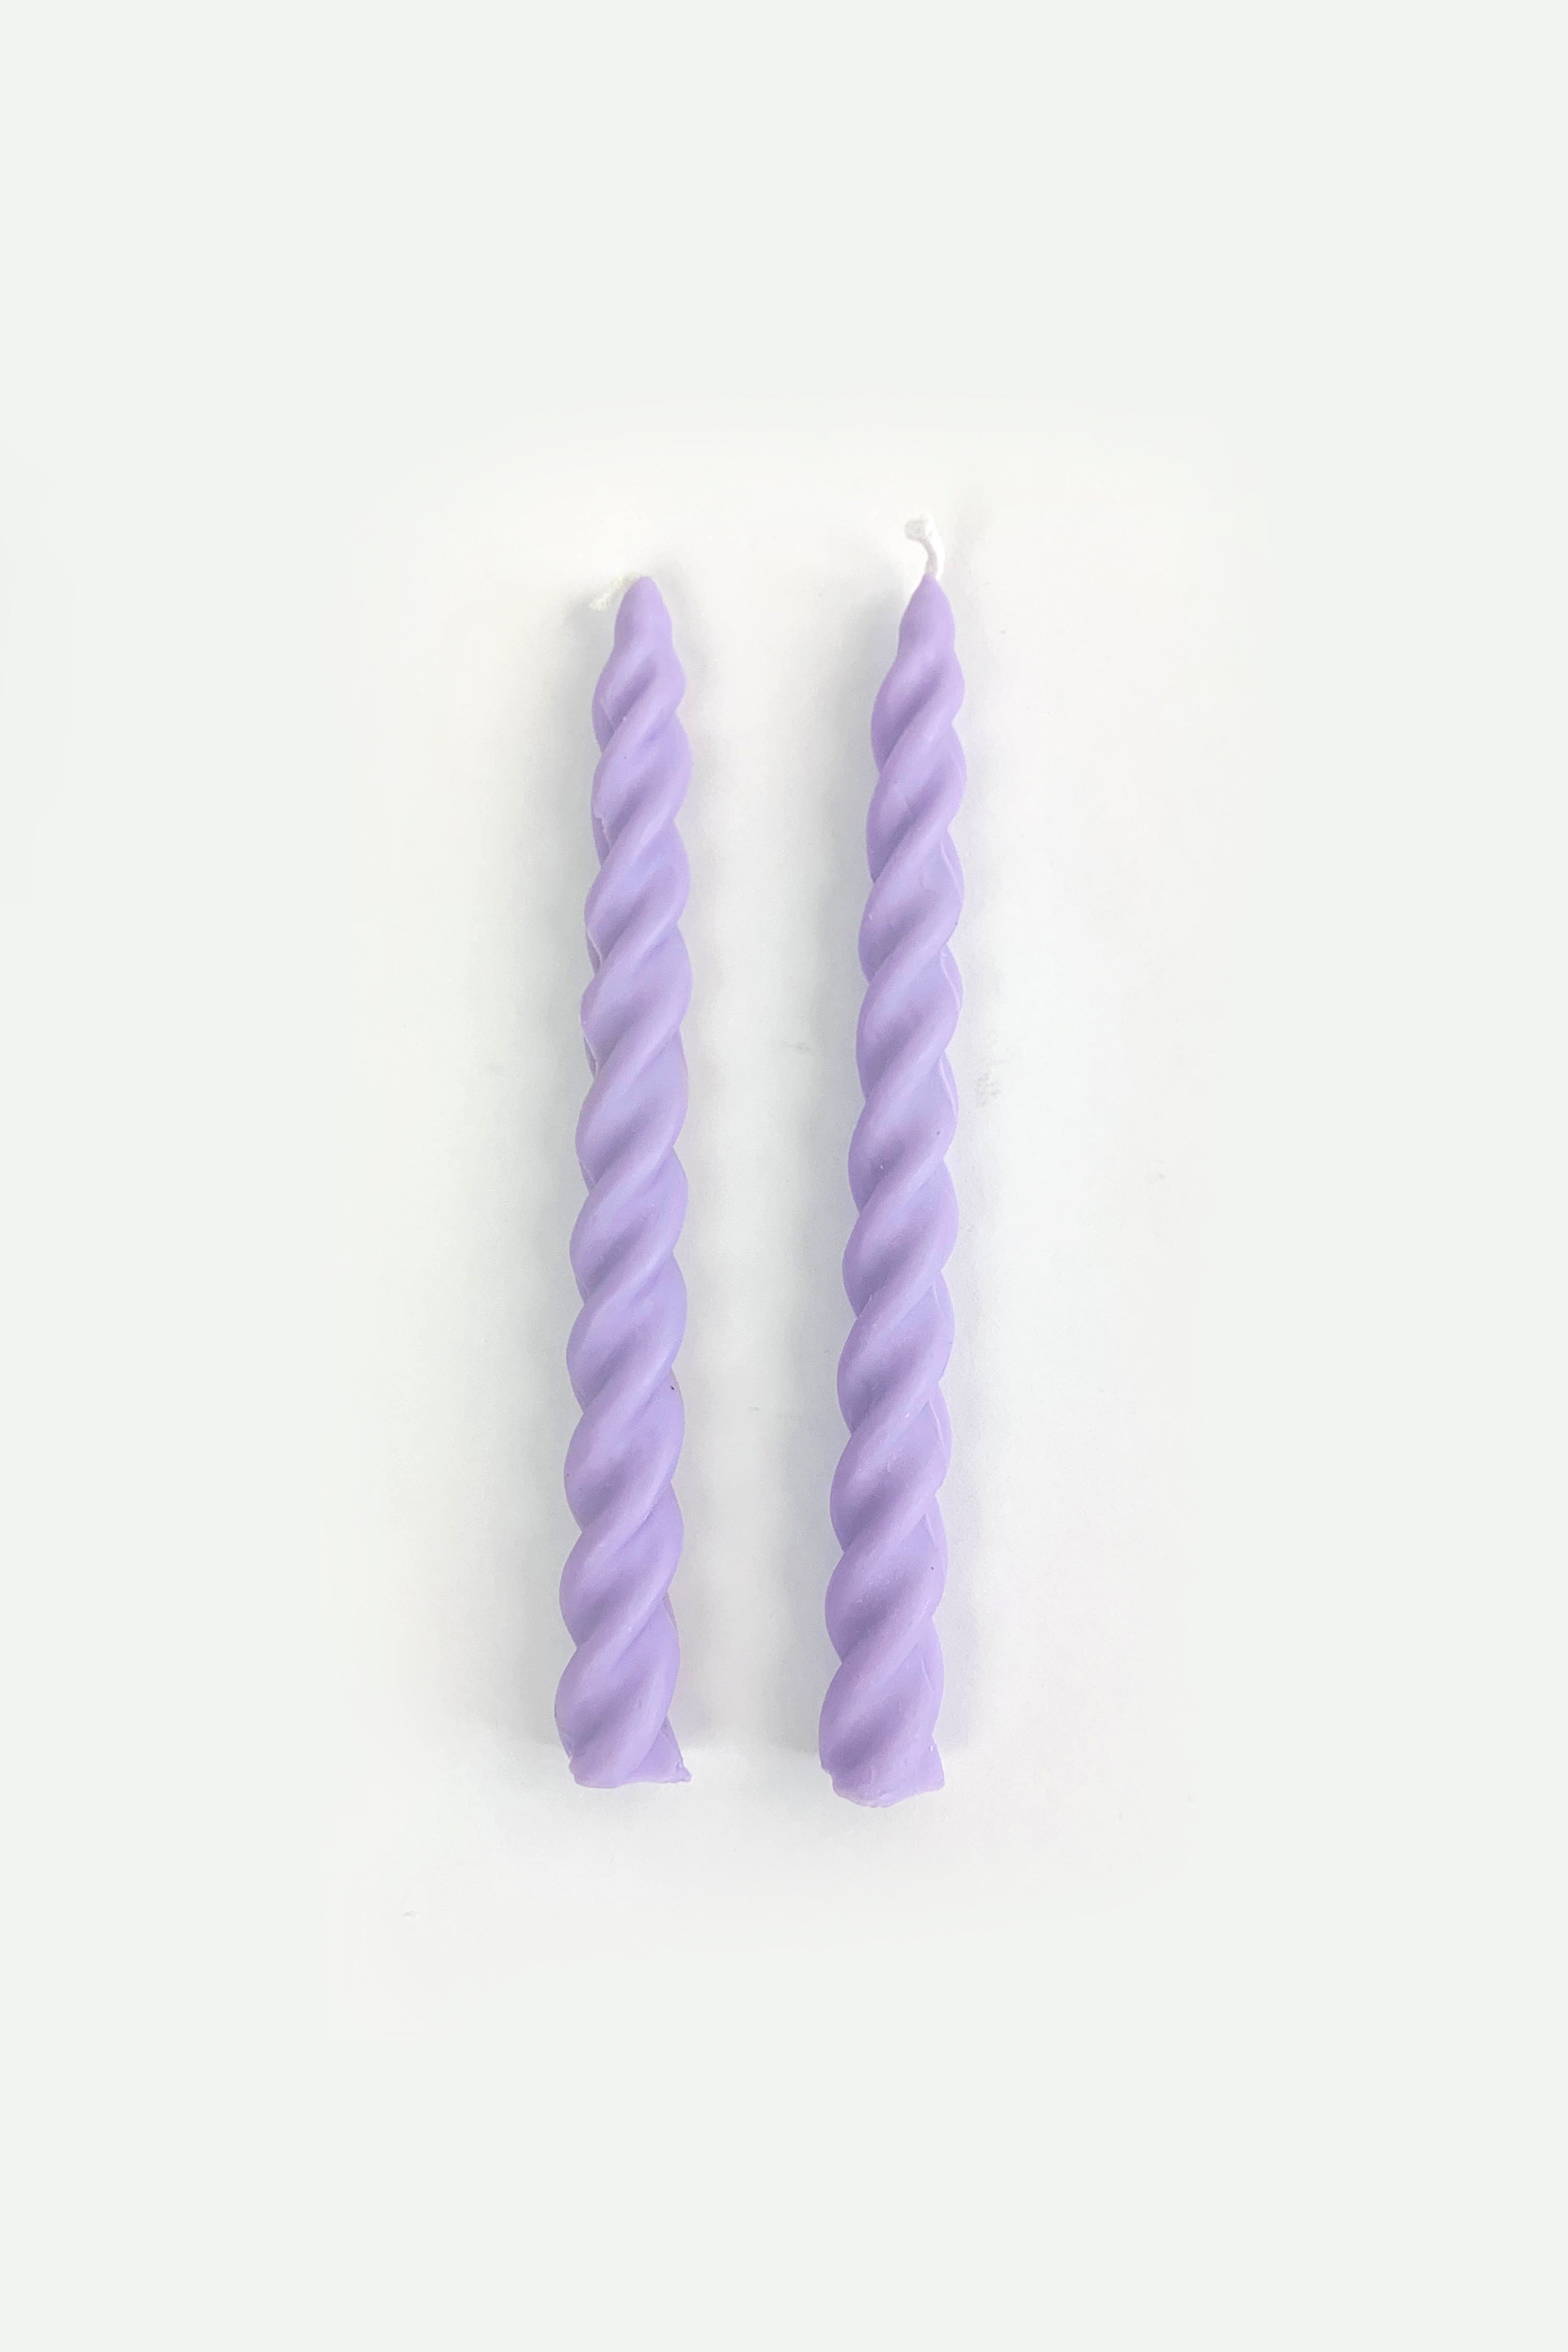 Twisted Taper Candle in Lavender